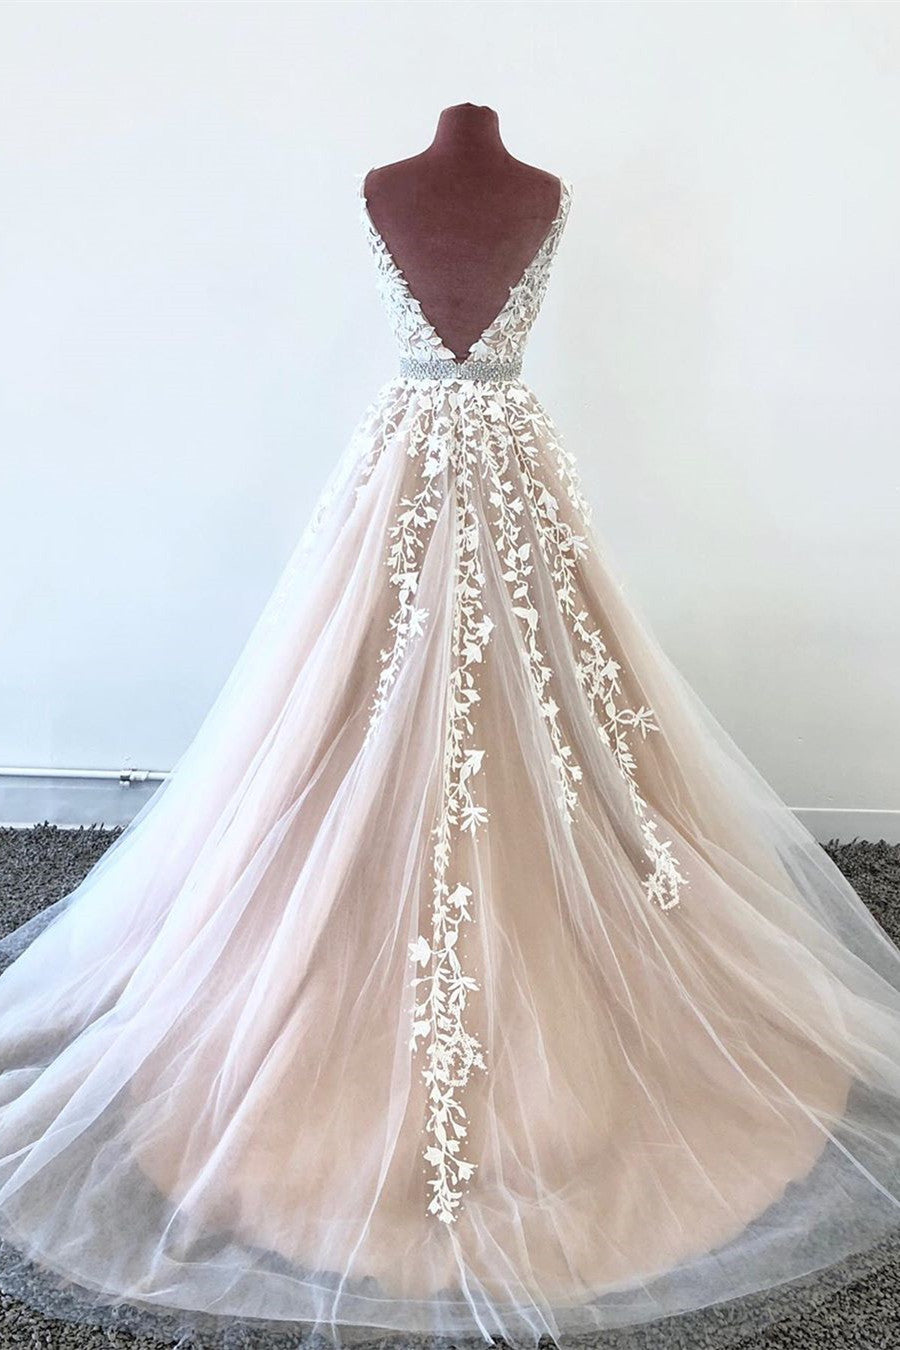 2023 New Style Prom Dress Long with Pearls Winter Formal Dress Pageant Dance Dresses Back To School Party Gown, PC1020